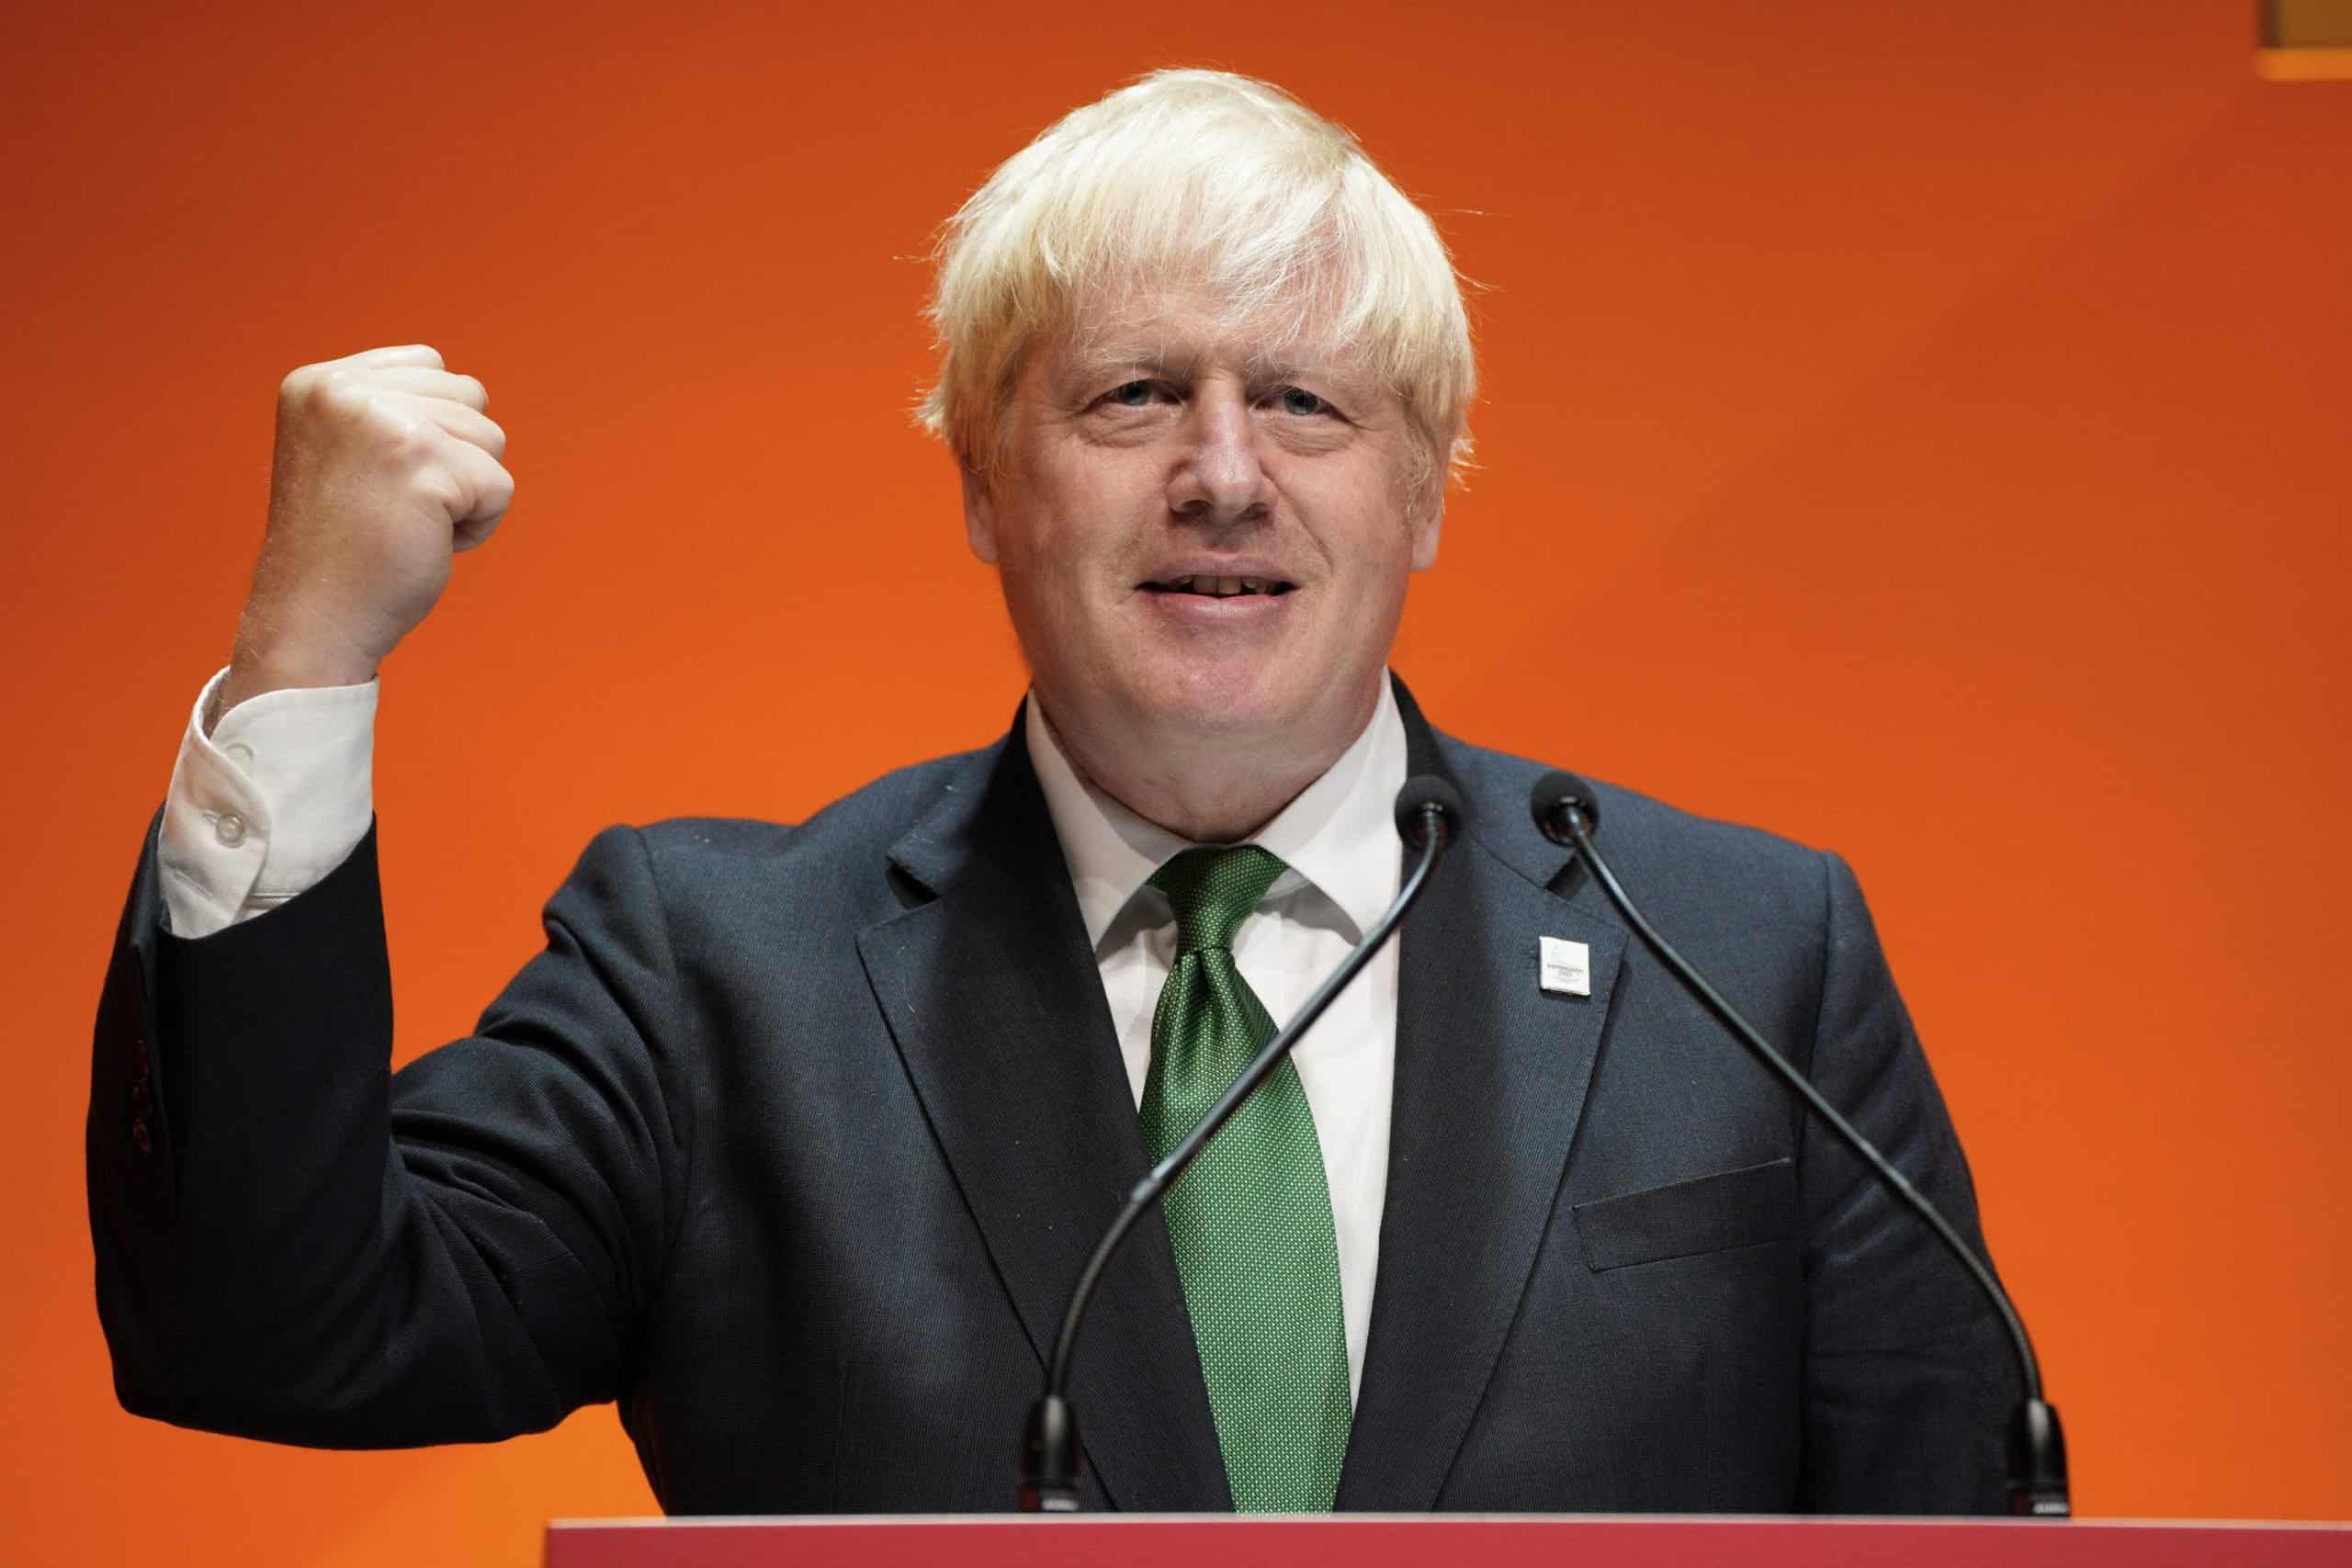 Johnson’s bid to bring back pounds and ounces will cost taxpayers £2m